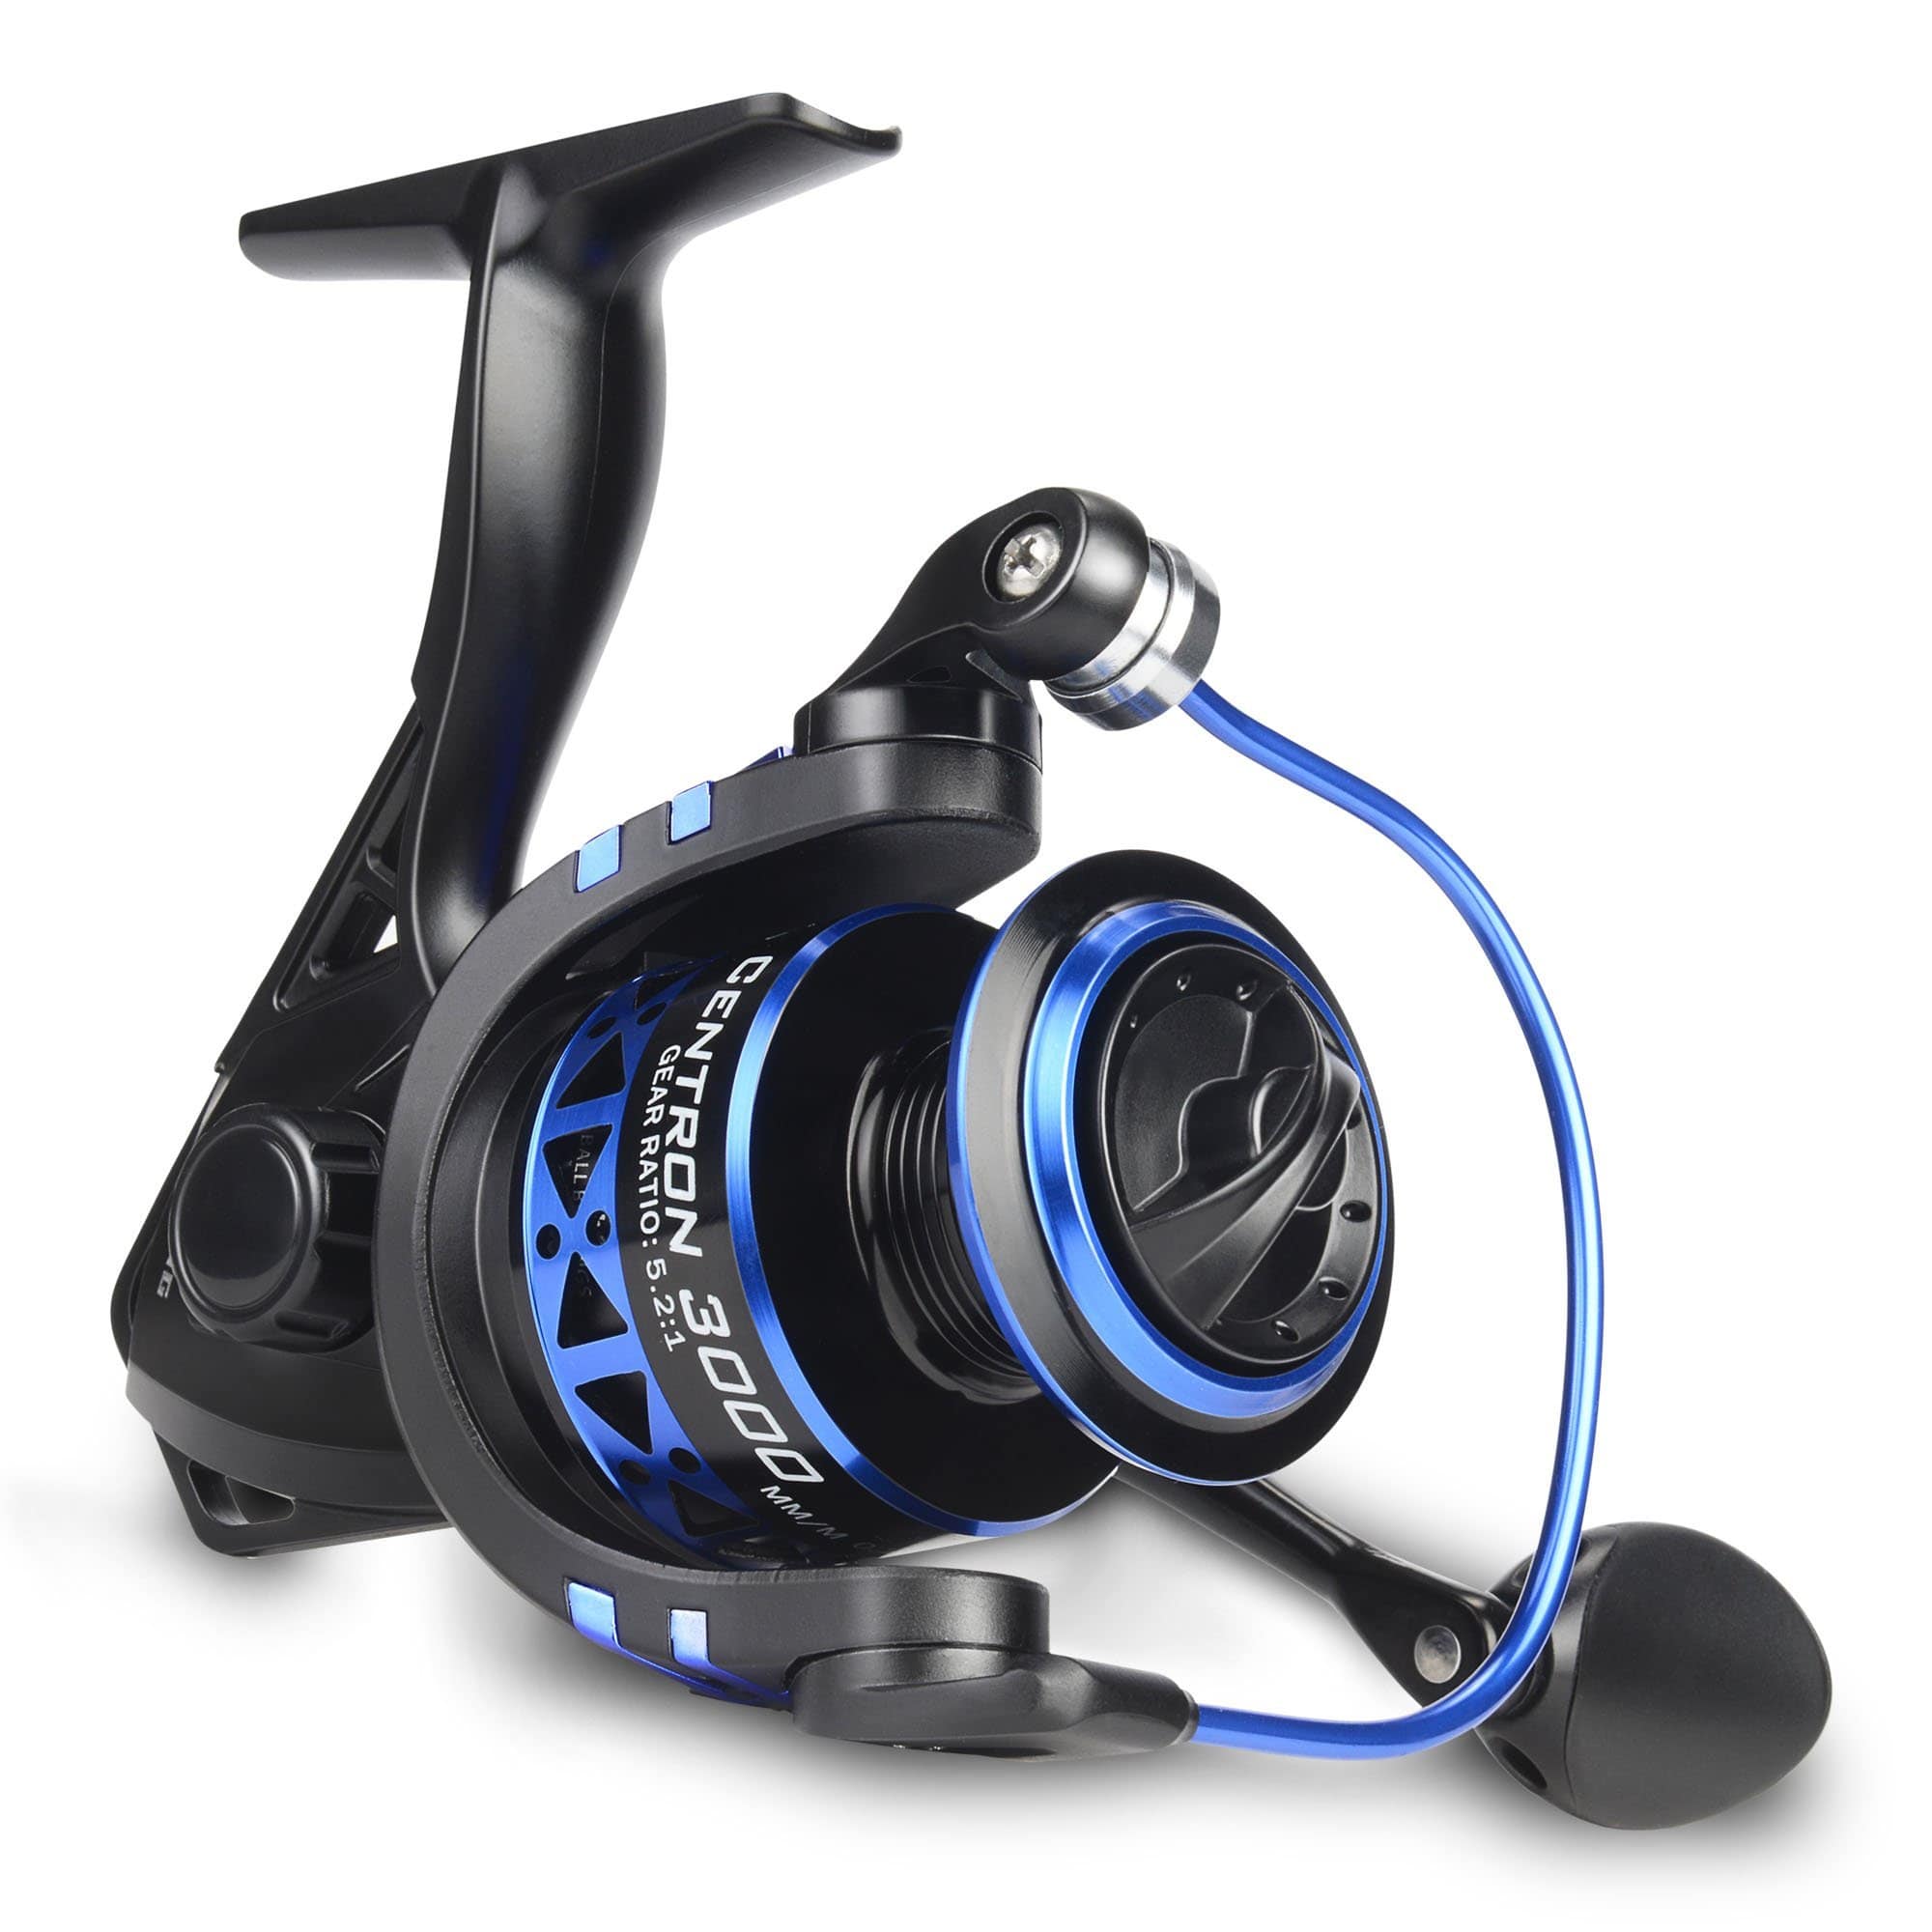 Affordable Fishing Combo Under $60 - NEW KastKing Centron Spinning Combo 